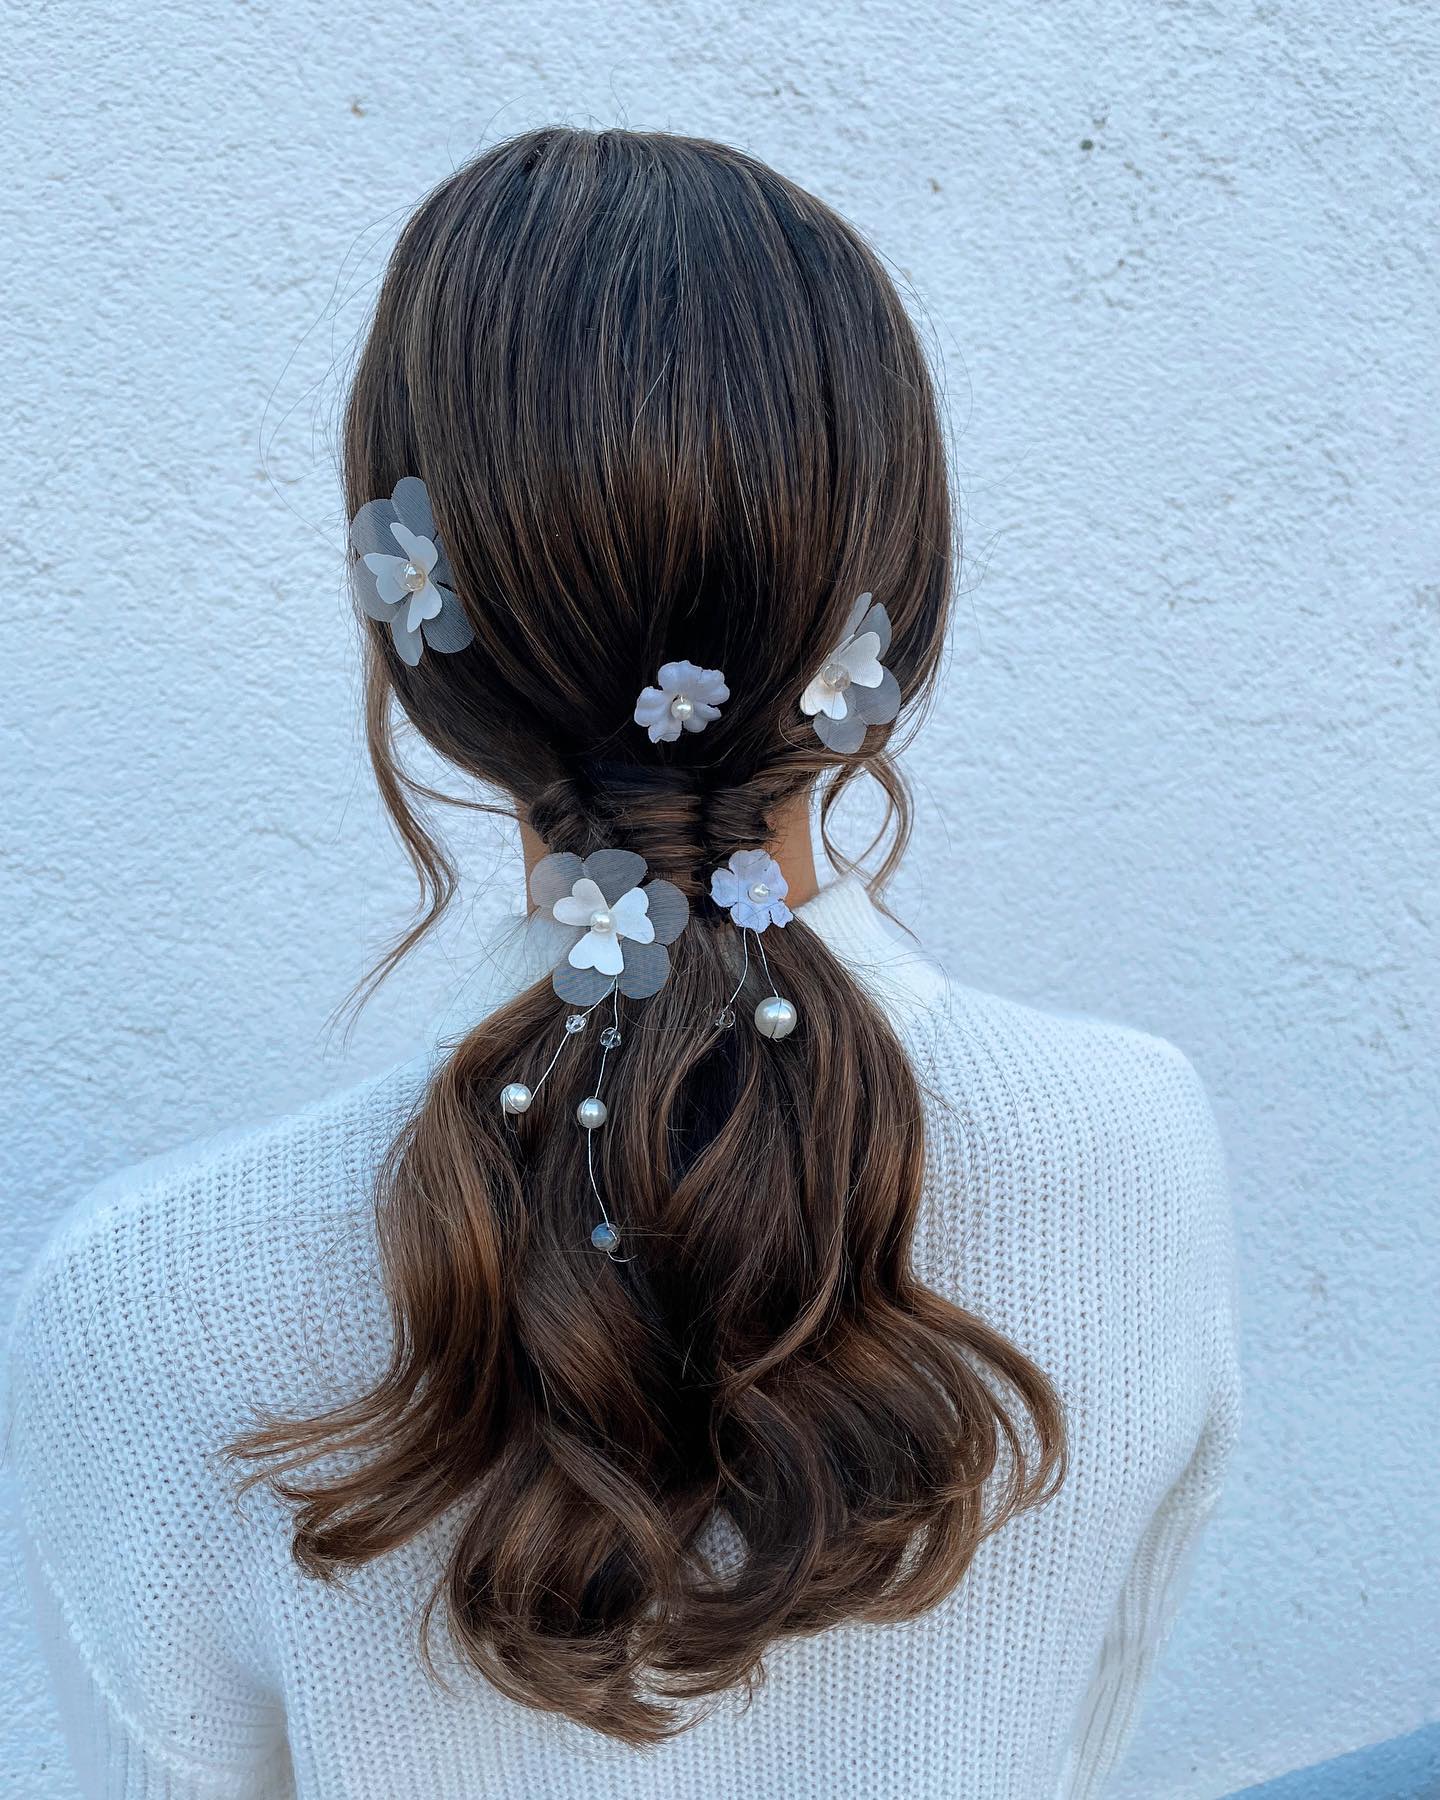 low ponytail with floral accessories